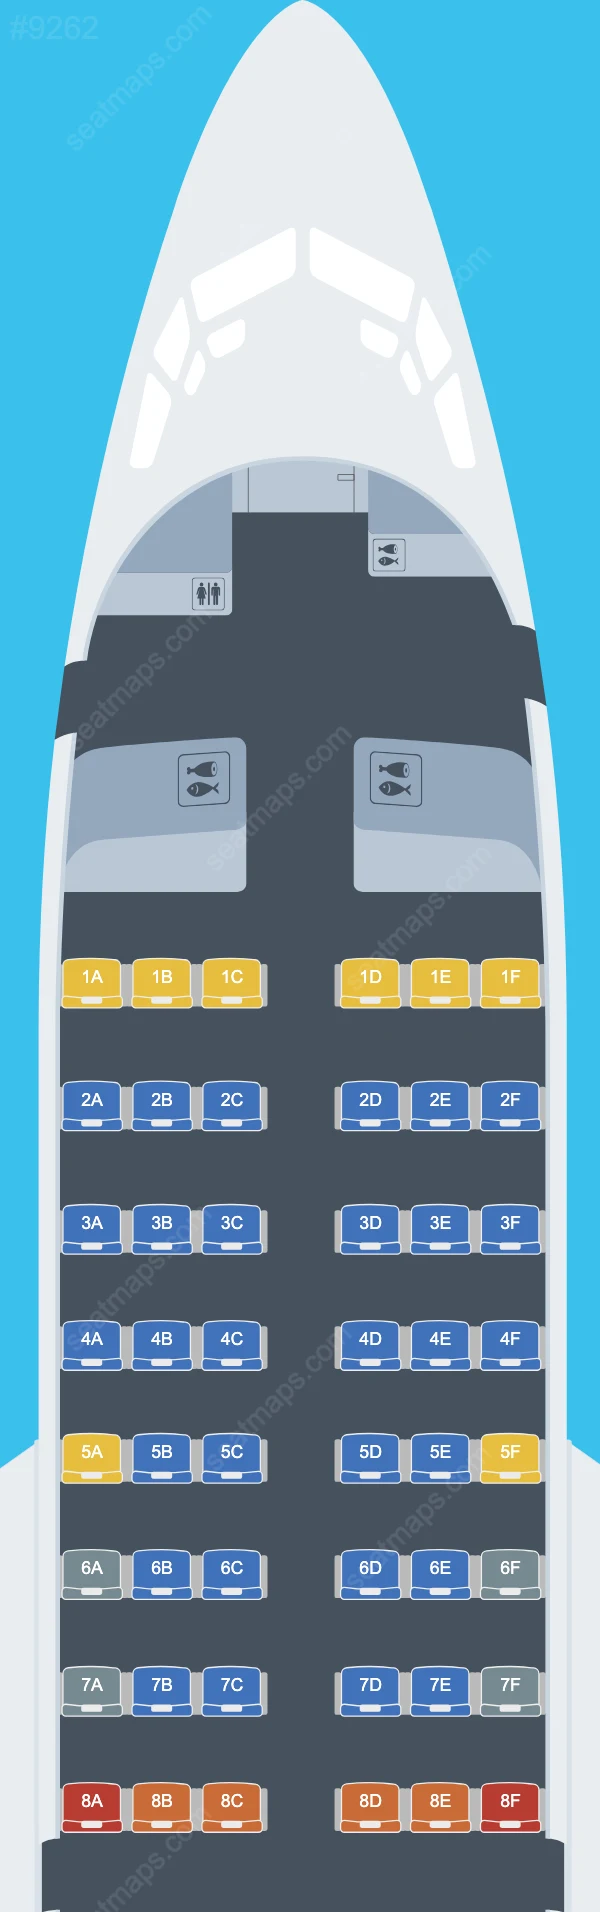 Badr Airlines Boeing 737-500 seatmap mobile preview